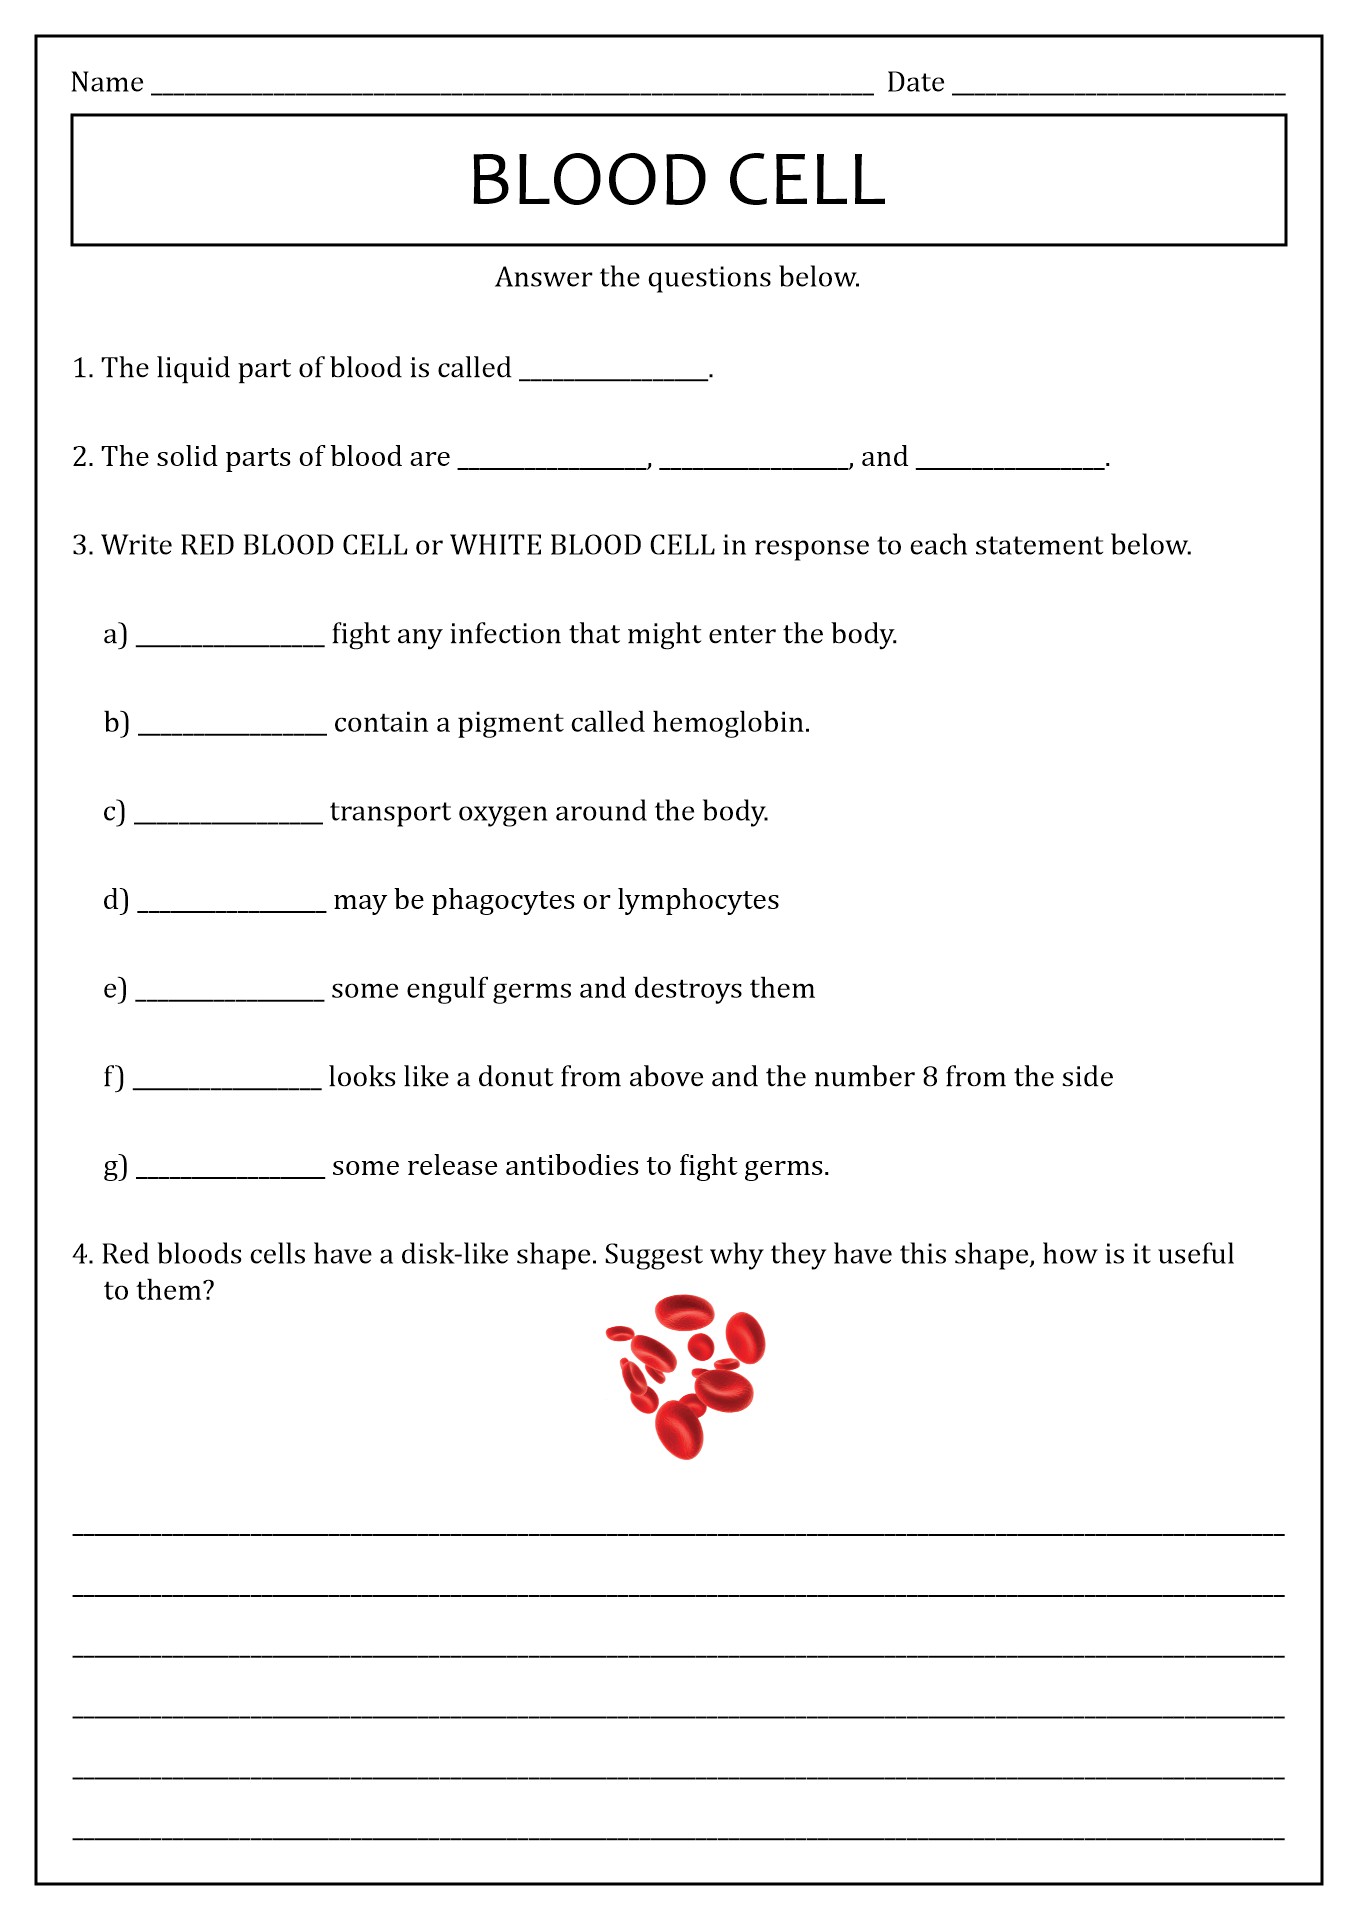 components-of-blood-worksheet-answers-first-wiring